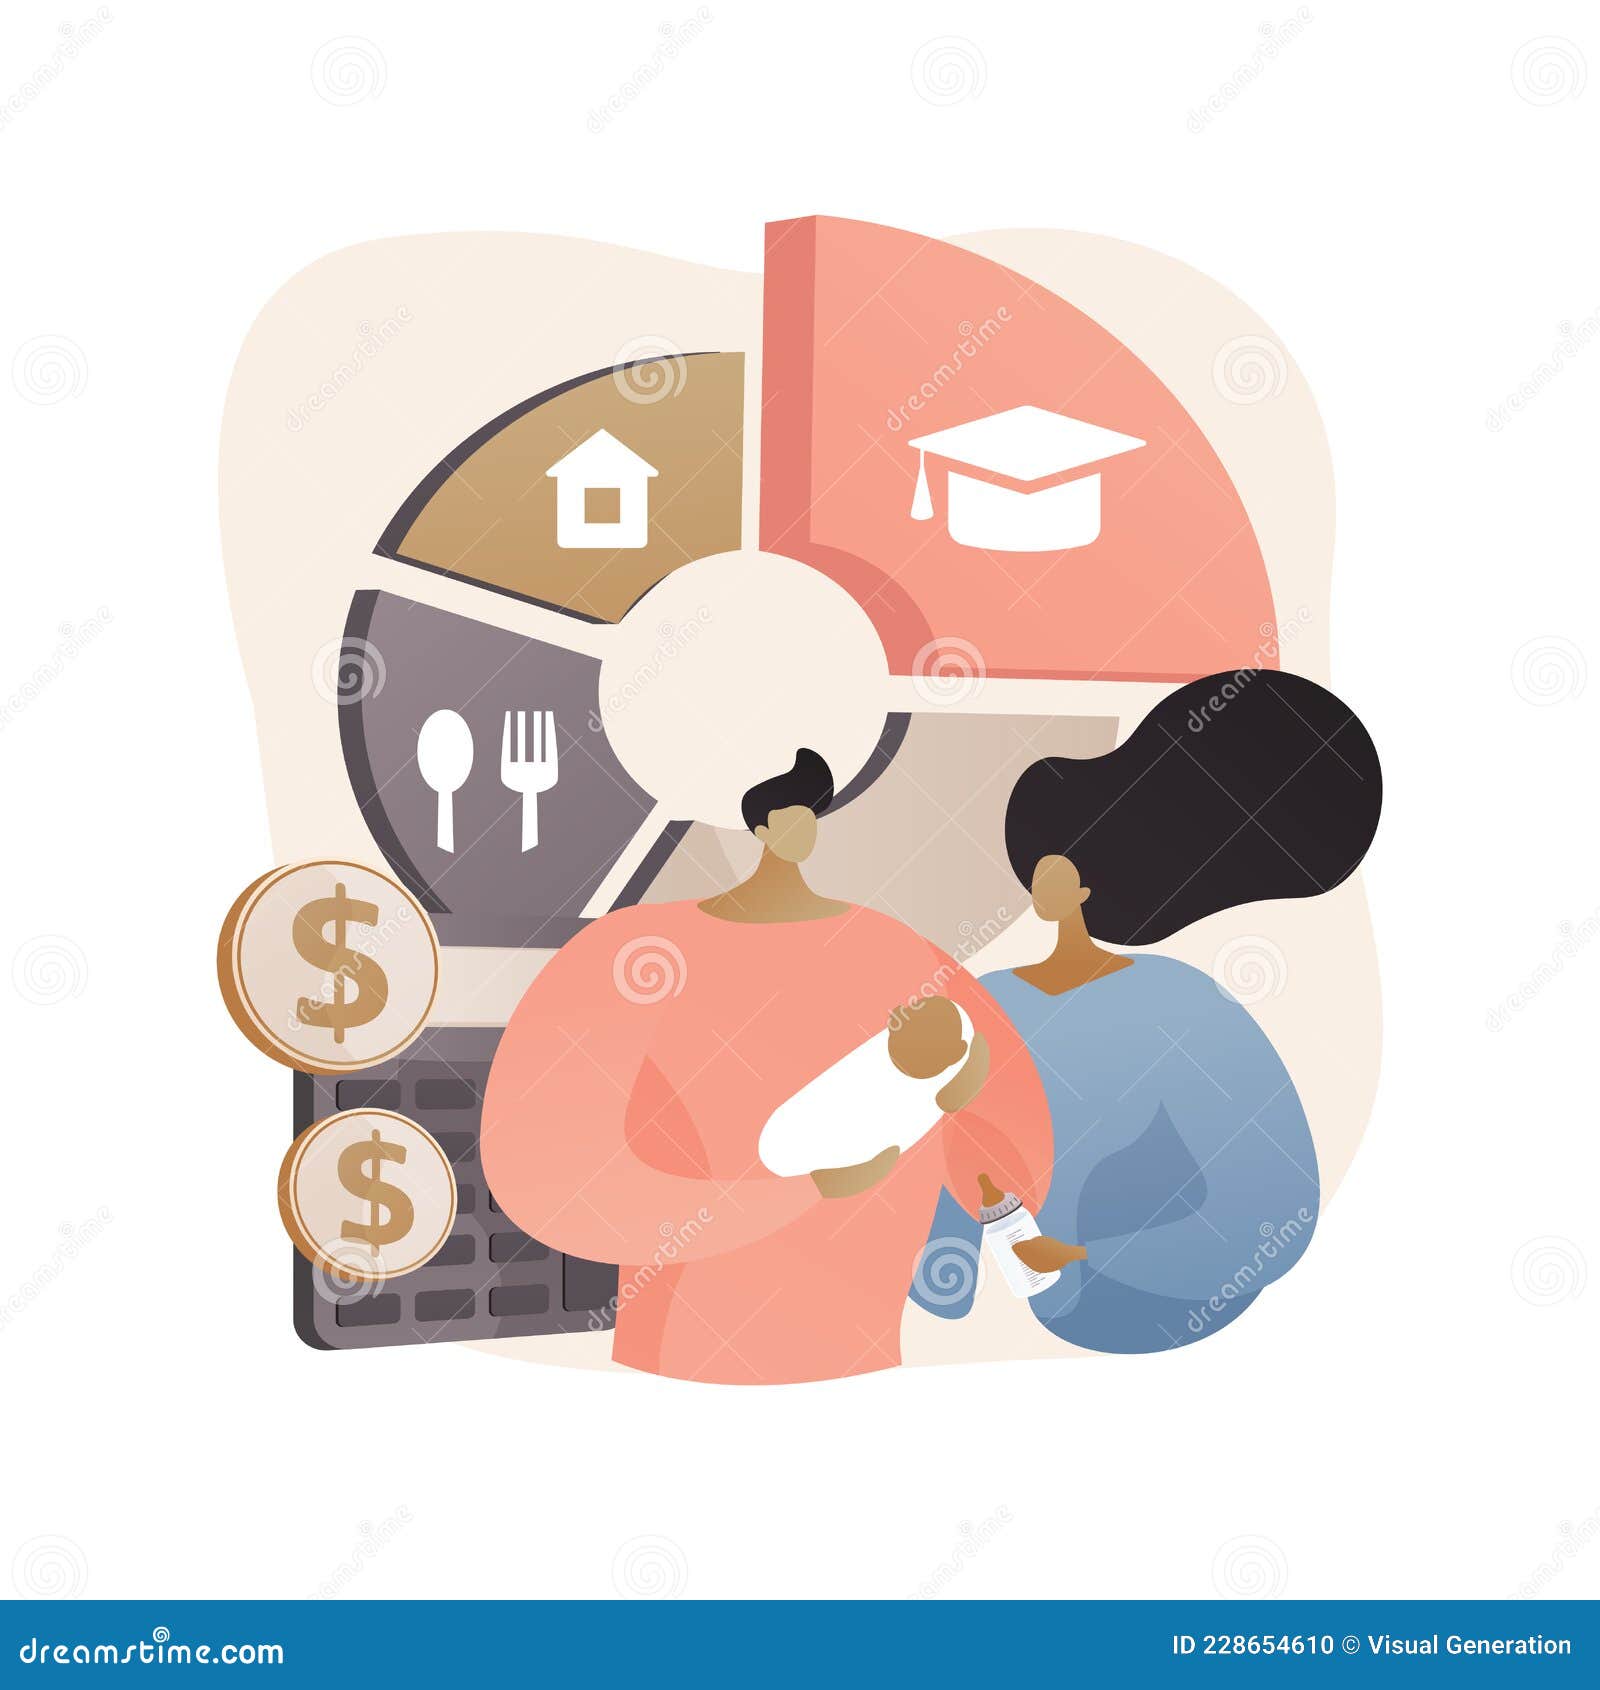 childcare-expenses-abstract-concept-vector-illustration-stock-vector